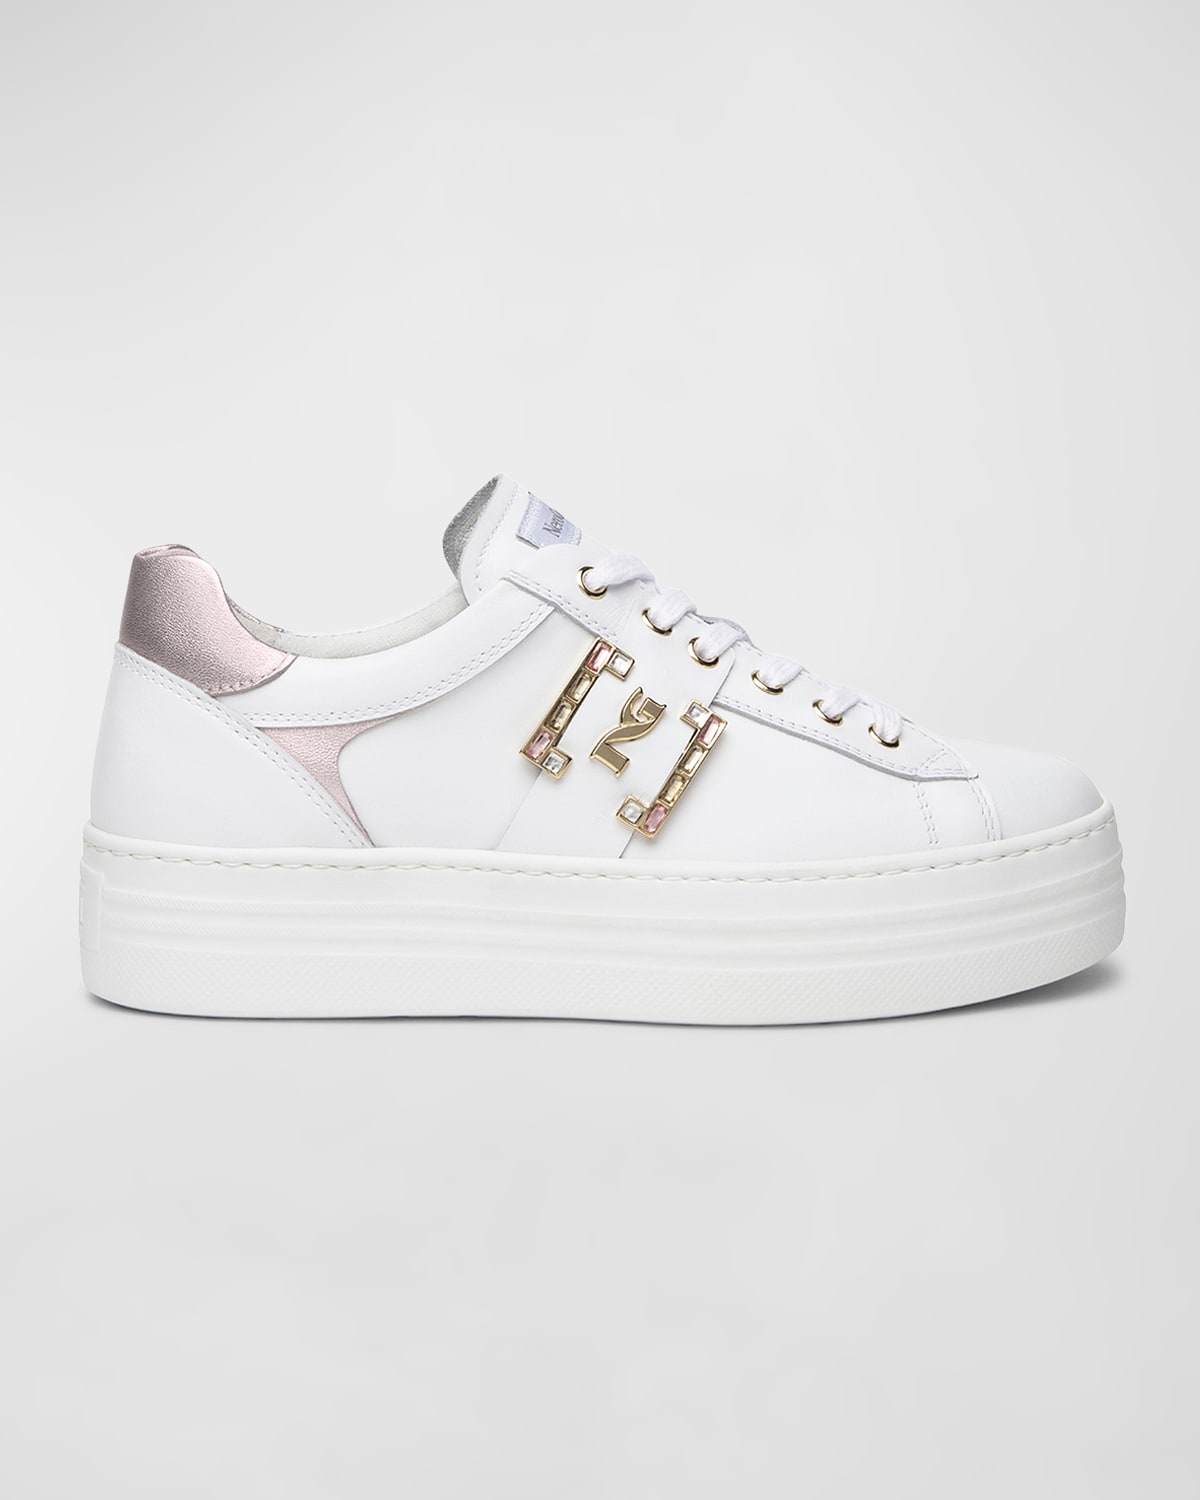 Jeweled Logo Leather Skater Sneakers